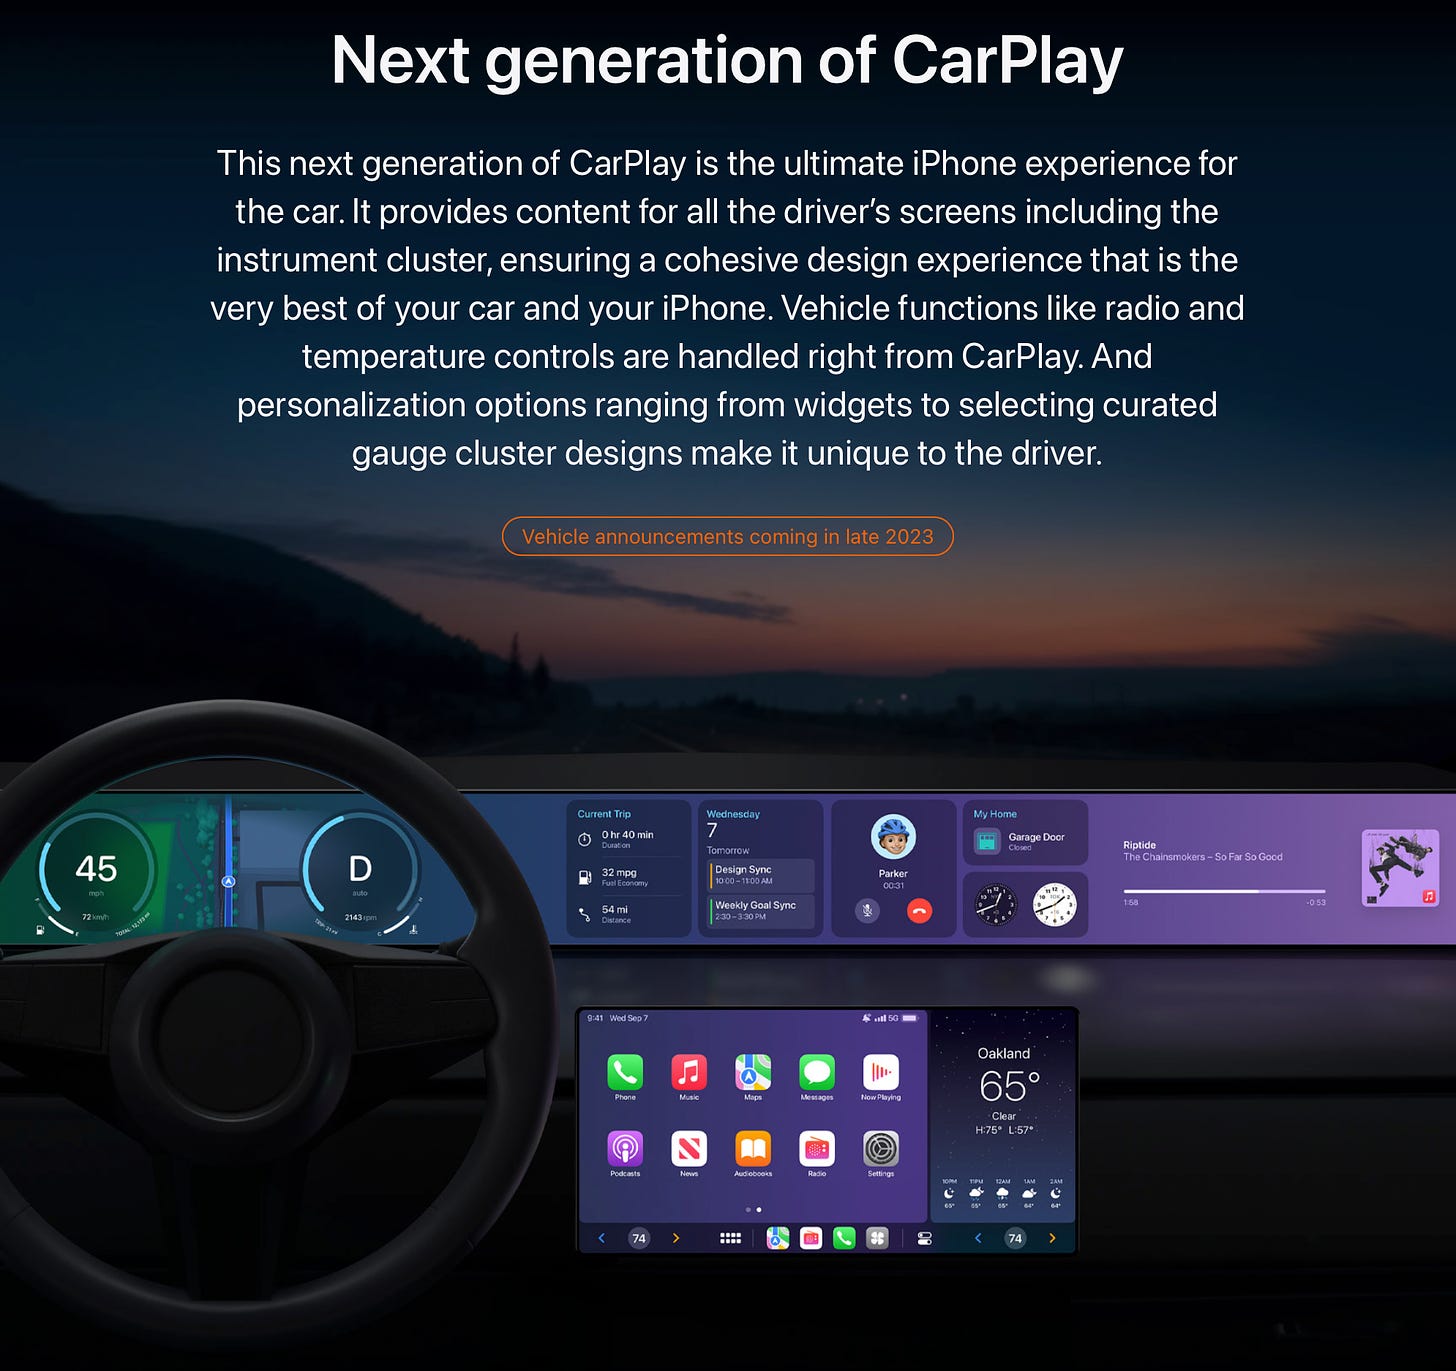 This next generation of CarPlay is the ultimate iPhone experience for the car. It provides content for all the driver’s screens including the instrument cluster, ensuring a cohesive design experience that is the very best of your car and your iPhone. Vehicle functions like radio and temperature controls are handled right from CarPlay. And personalization options ranging from widgets to selecting curated gauge cluster designs make it unique to the driver. 